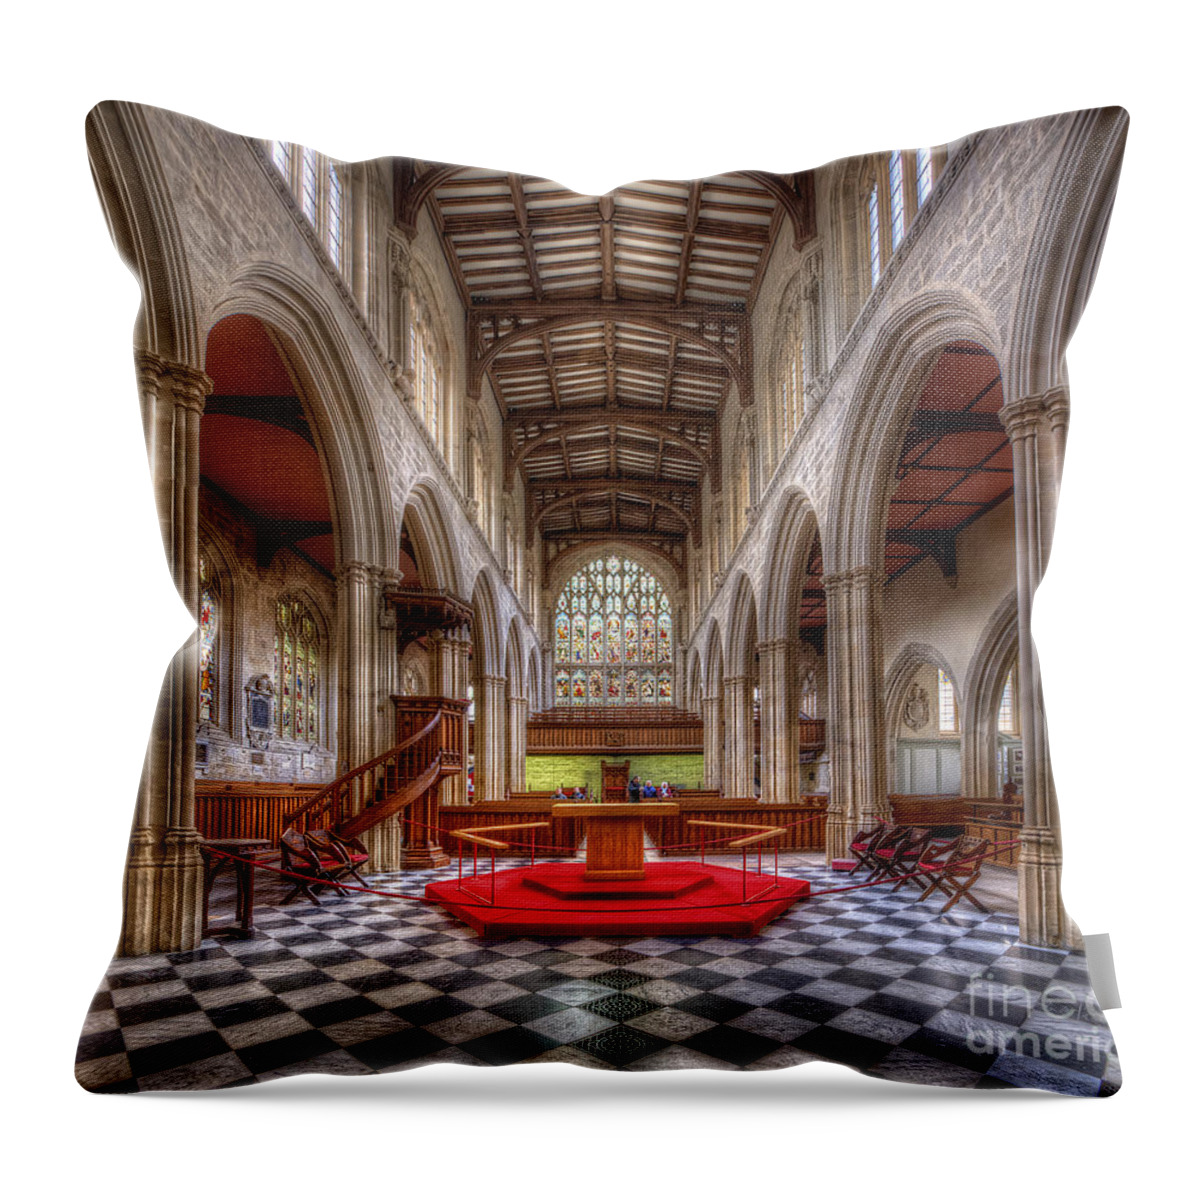 Oxford Throw Pillow featuring the photograph St Mary The Virgin Church - Nave by Yhun Suarez